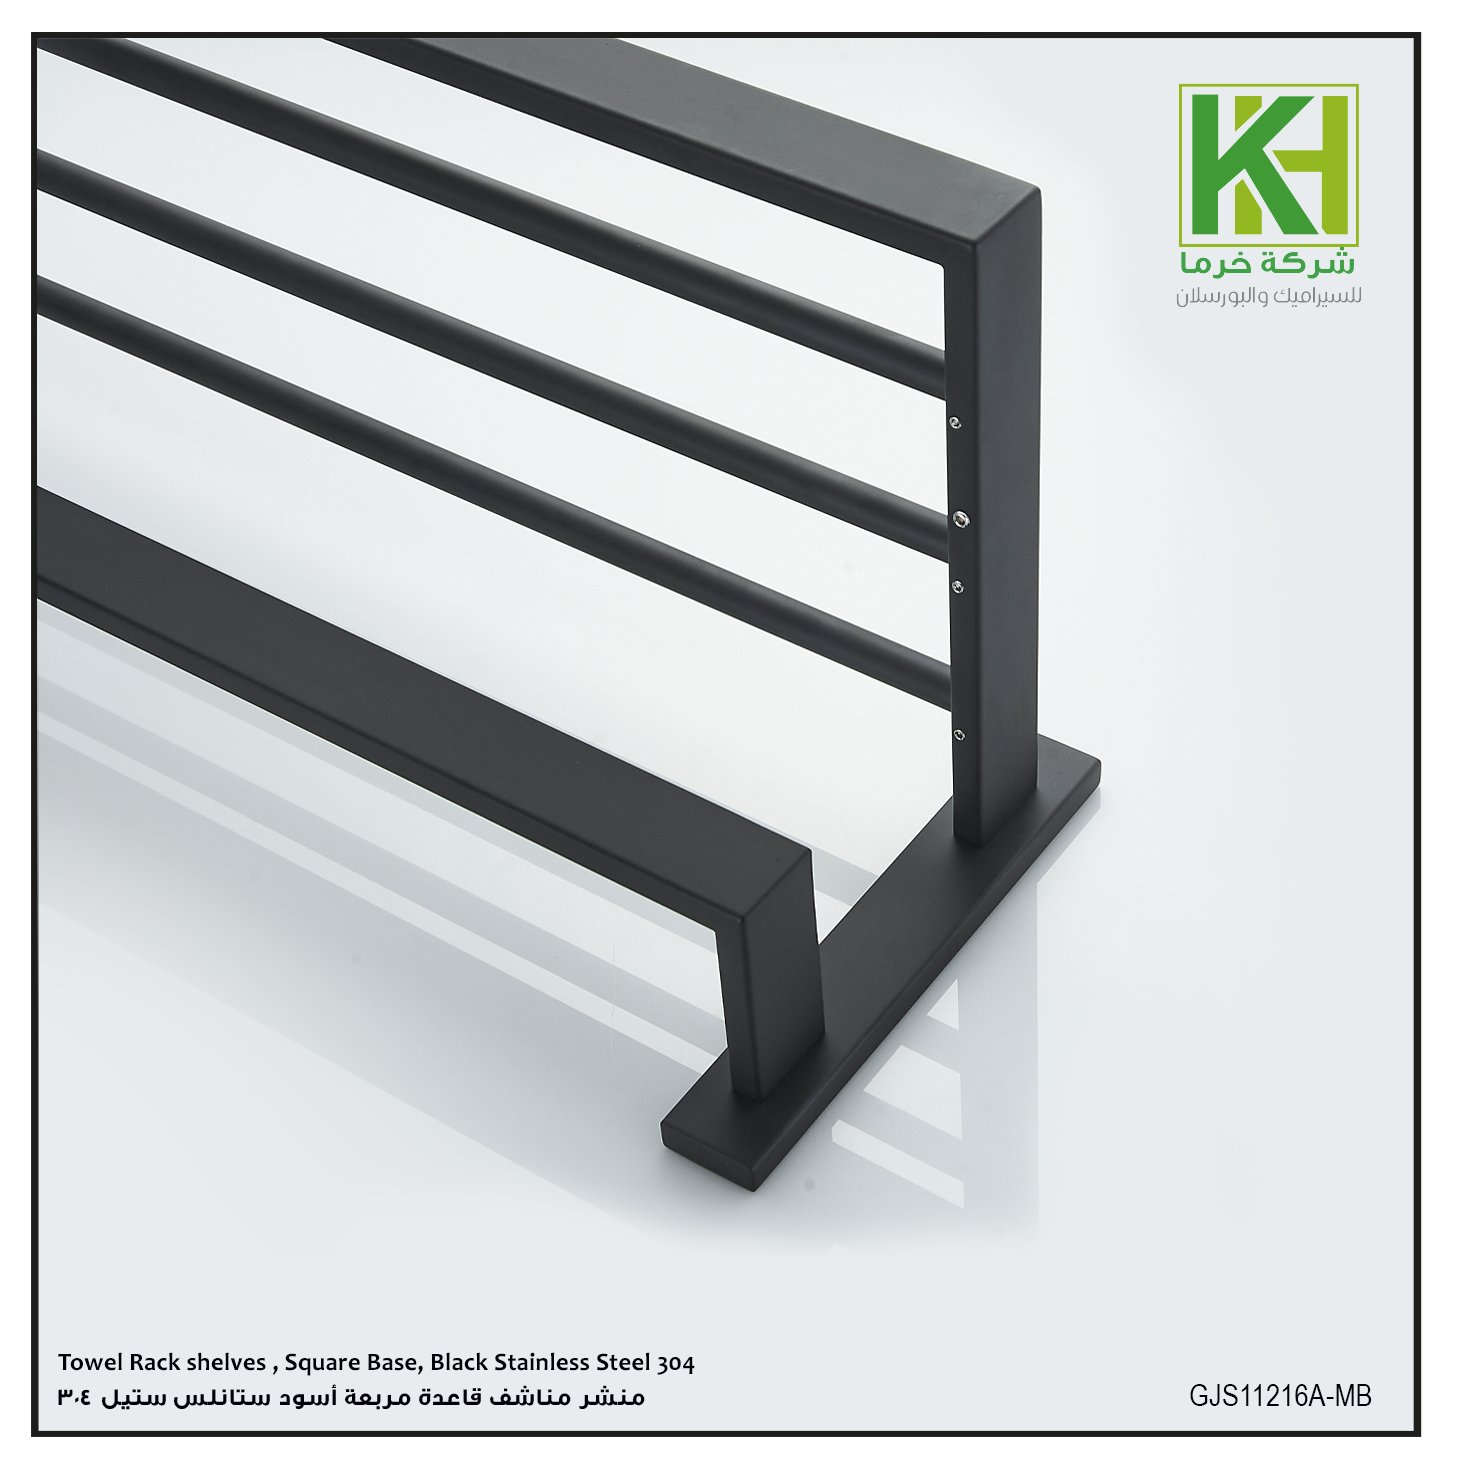 Picture of Towel Rack shelves , Square Base, Black Stainless Steel 304